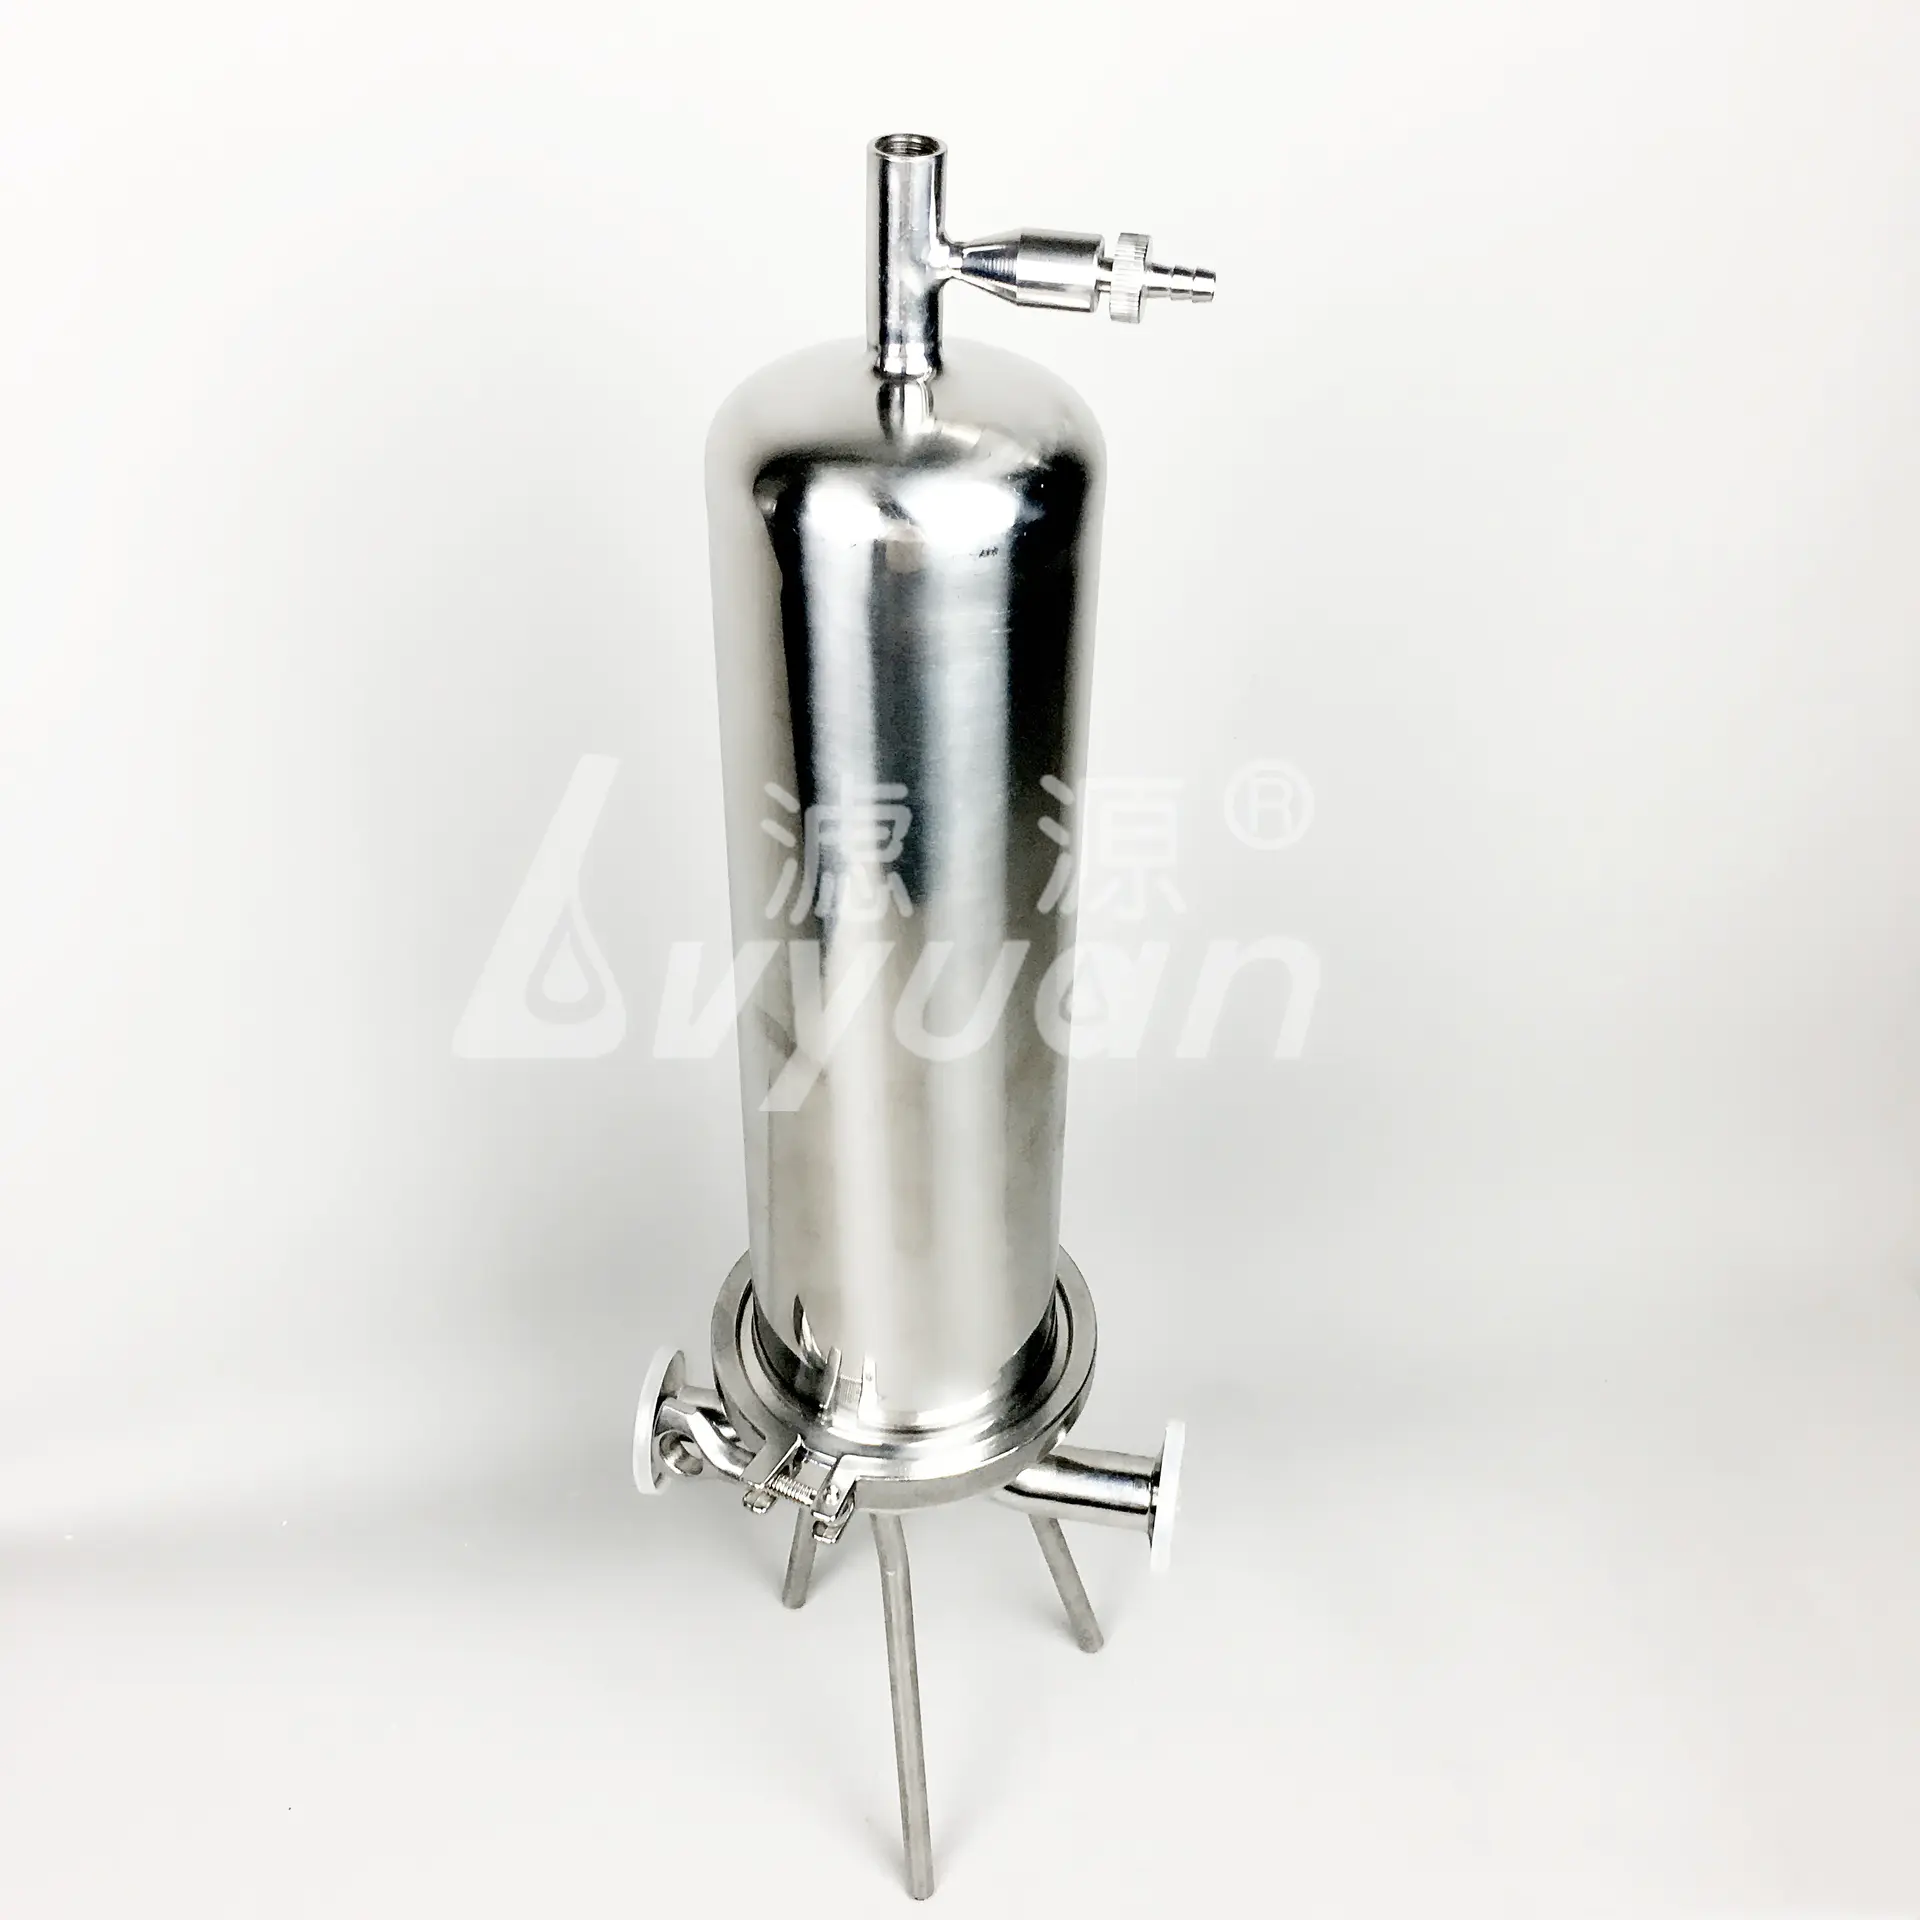 Micron /precision stainless steel filter/ss food grade water filter housing 10 inch for water filtration